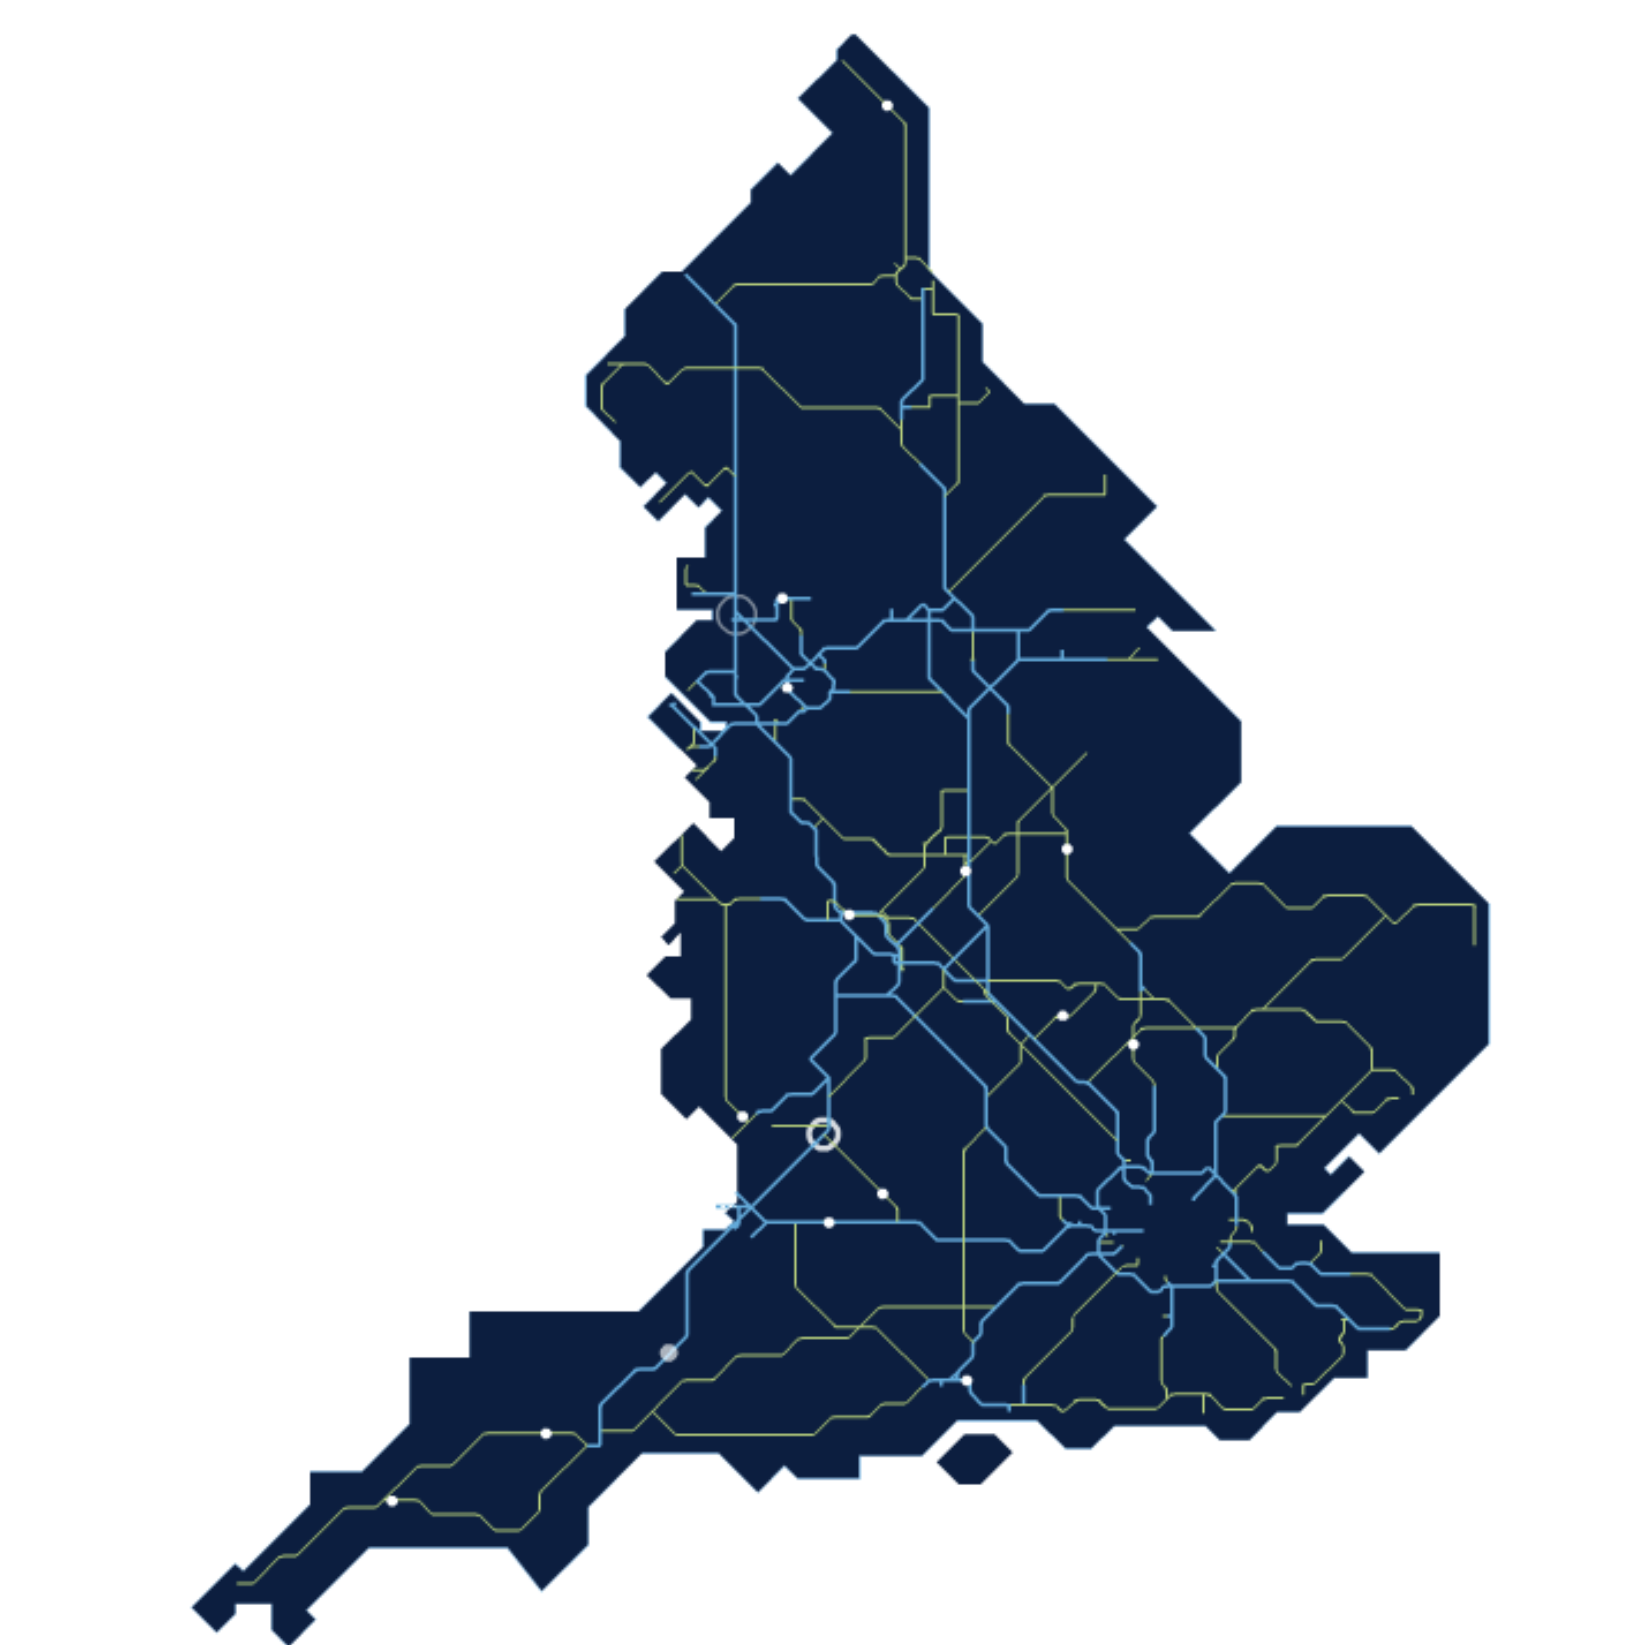 illustrative map of England's road network